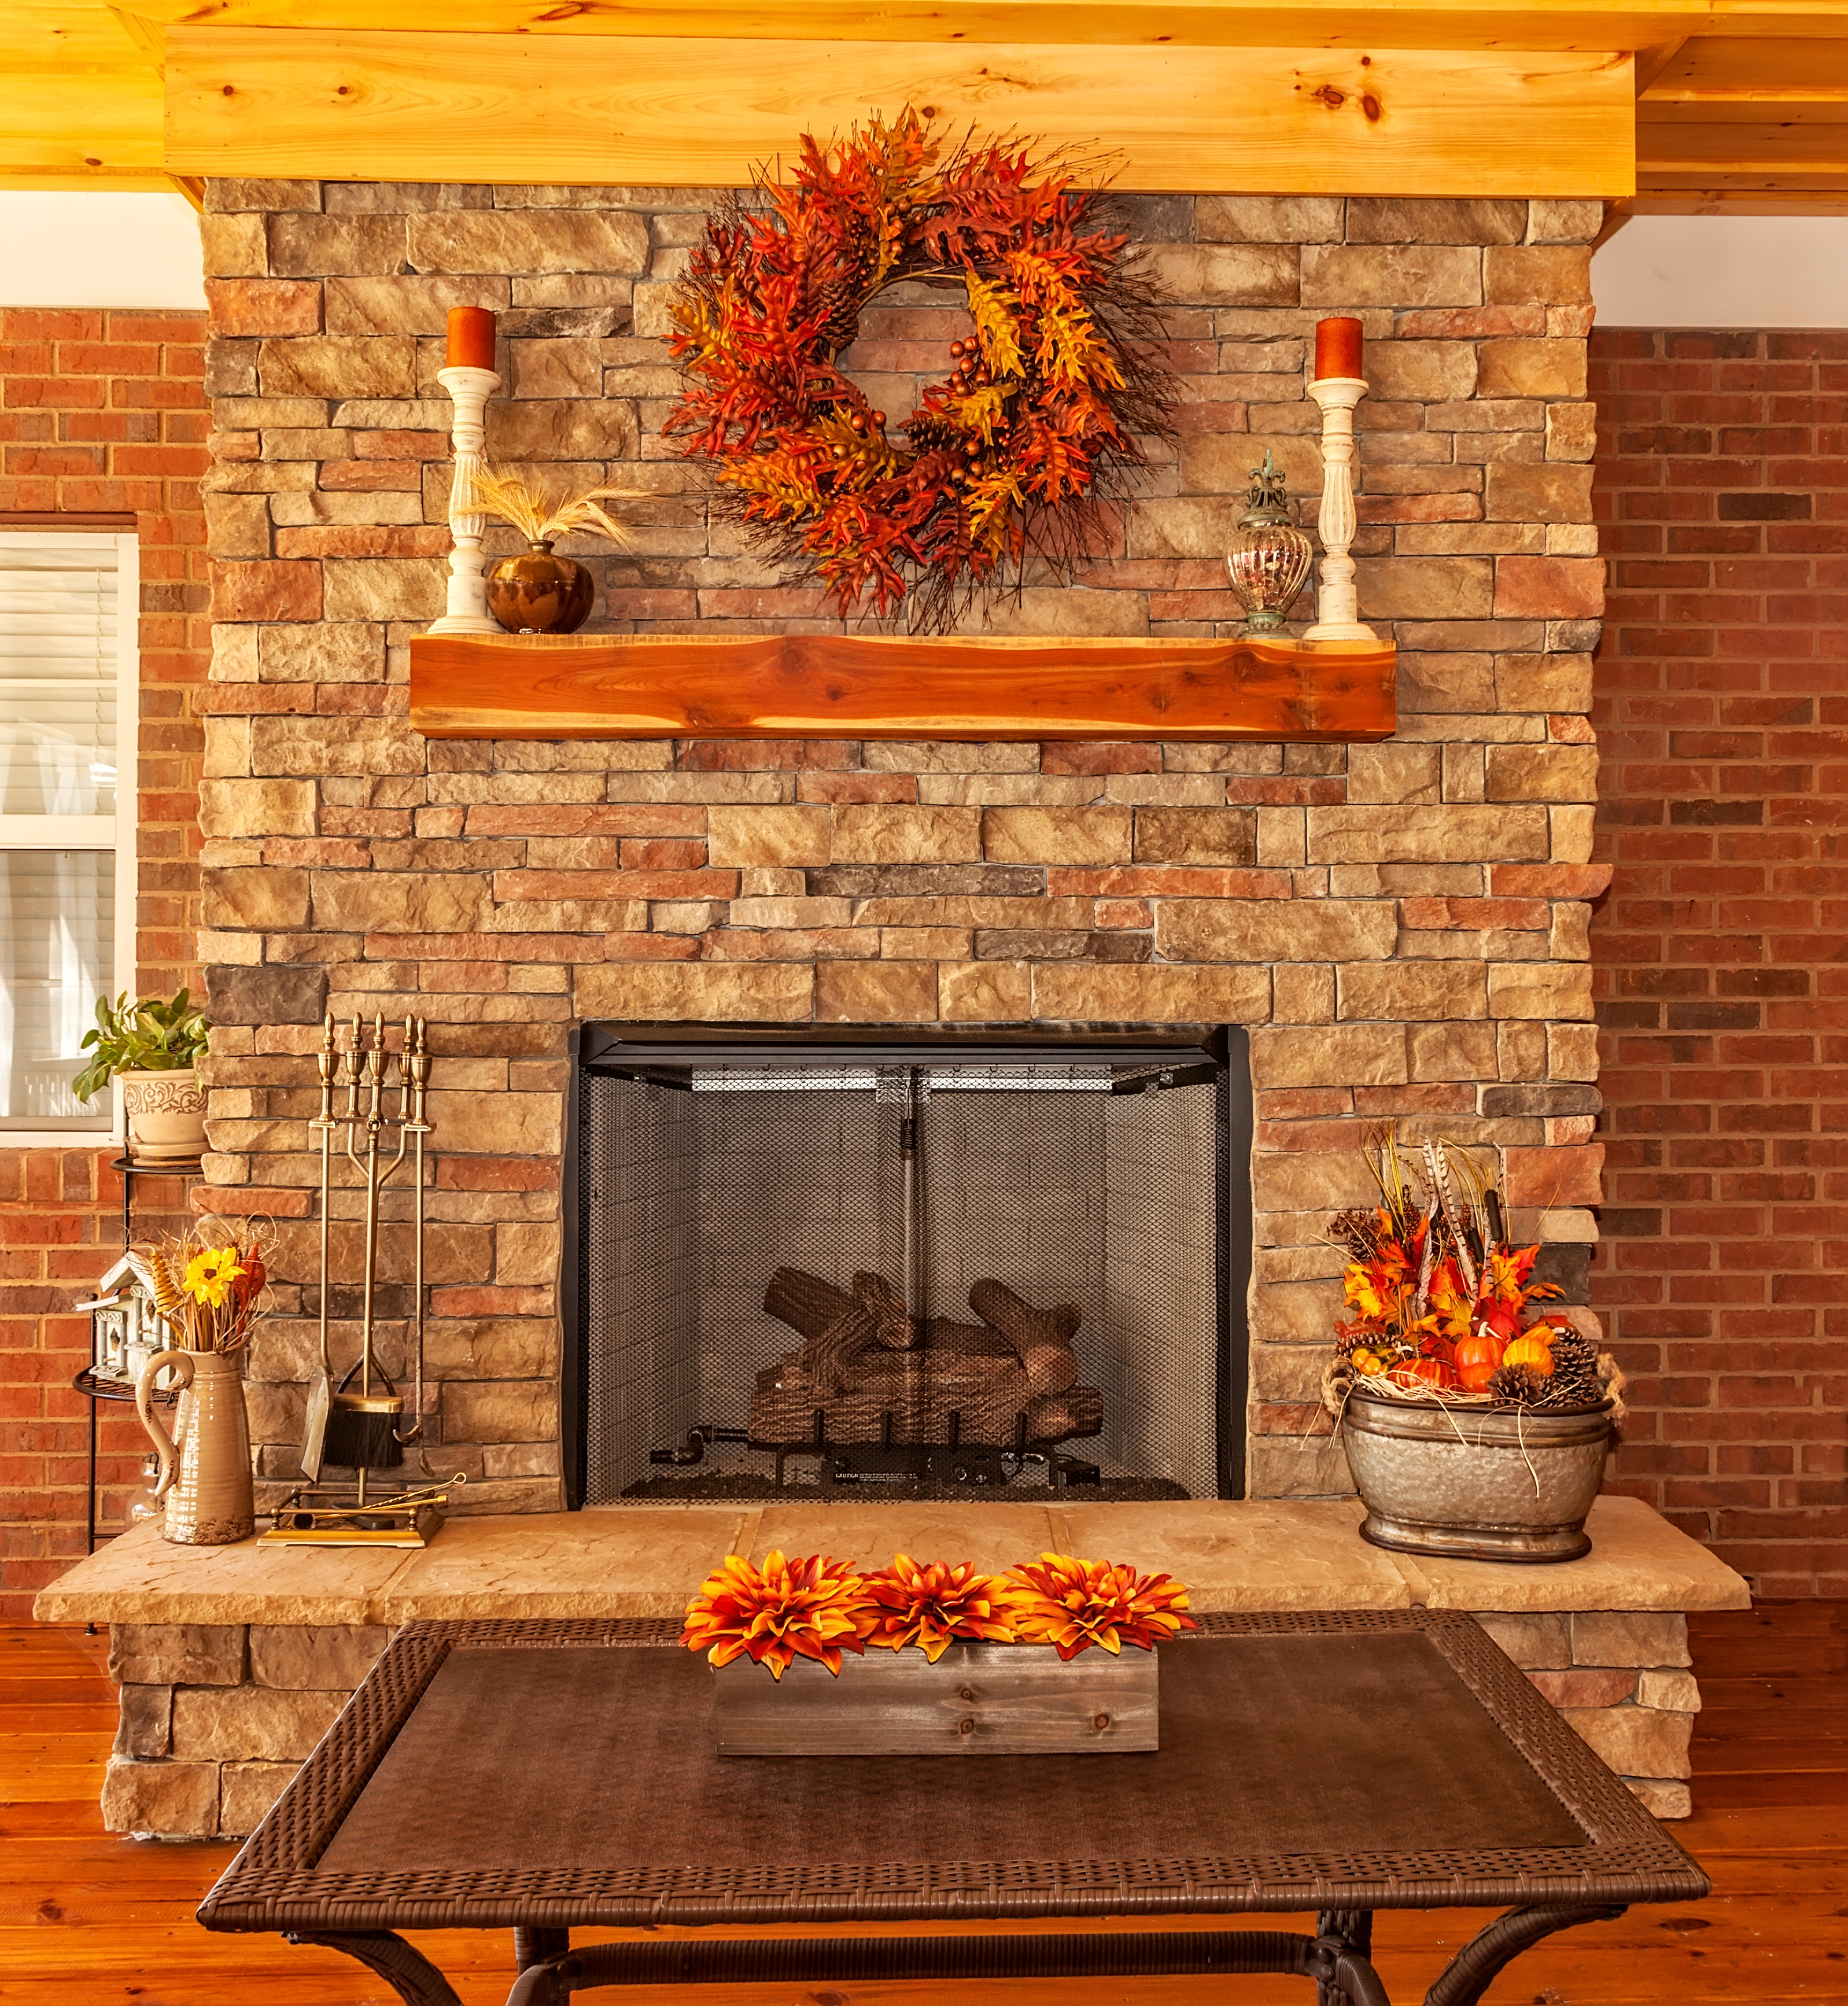 5 Fall Mantel Decorating Ideas That'll Make You Look Like a Pro 58